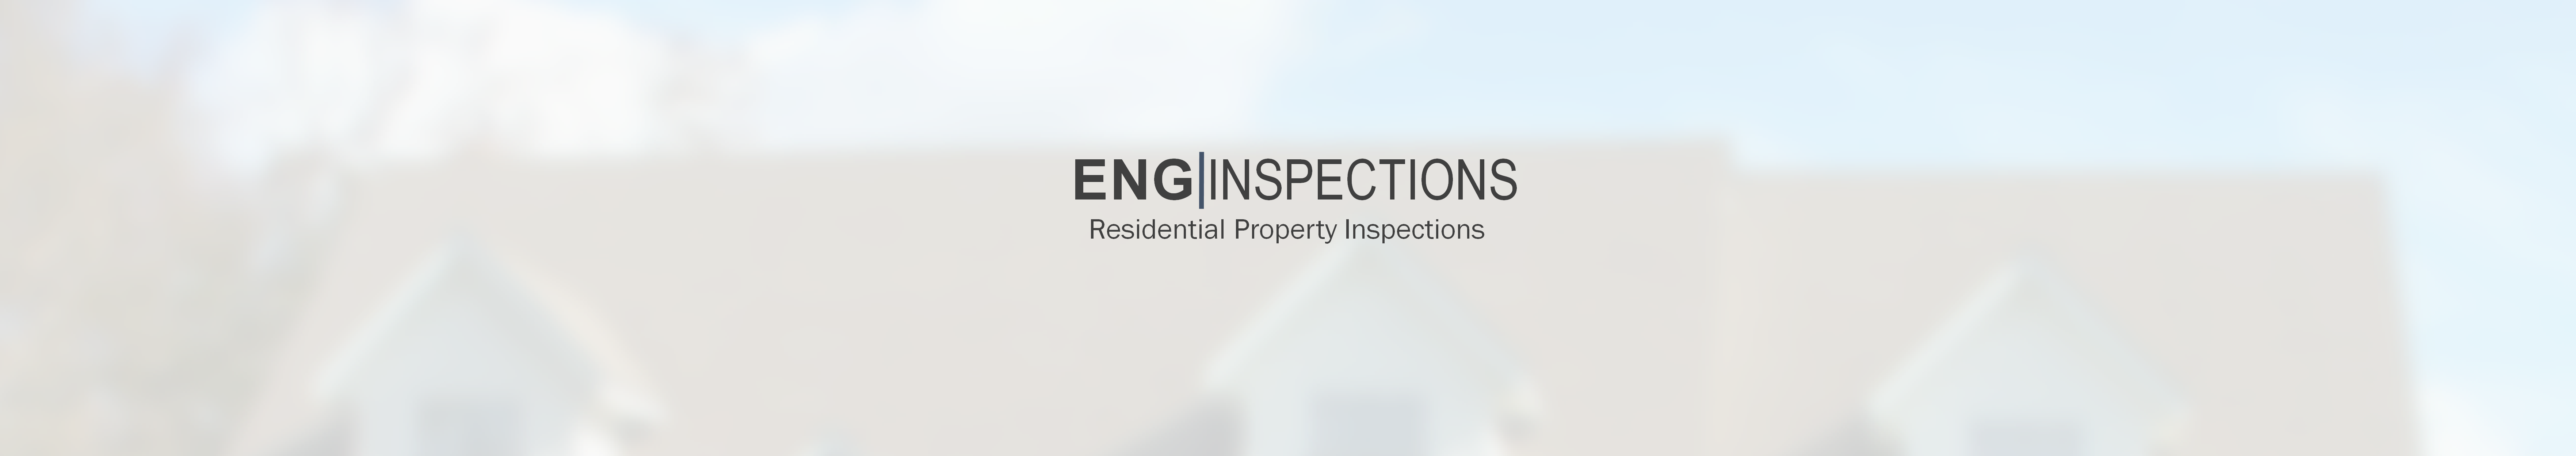 ENG Inspections Inc - Home Inspection Services